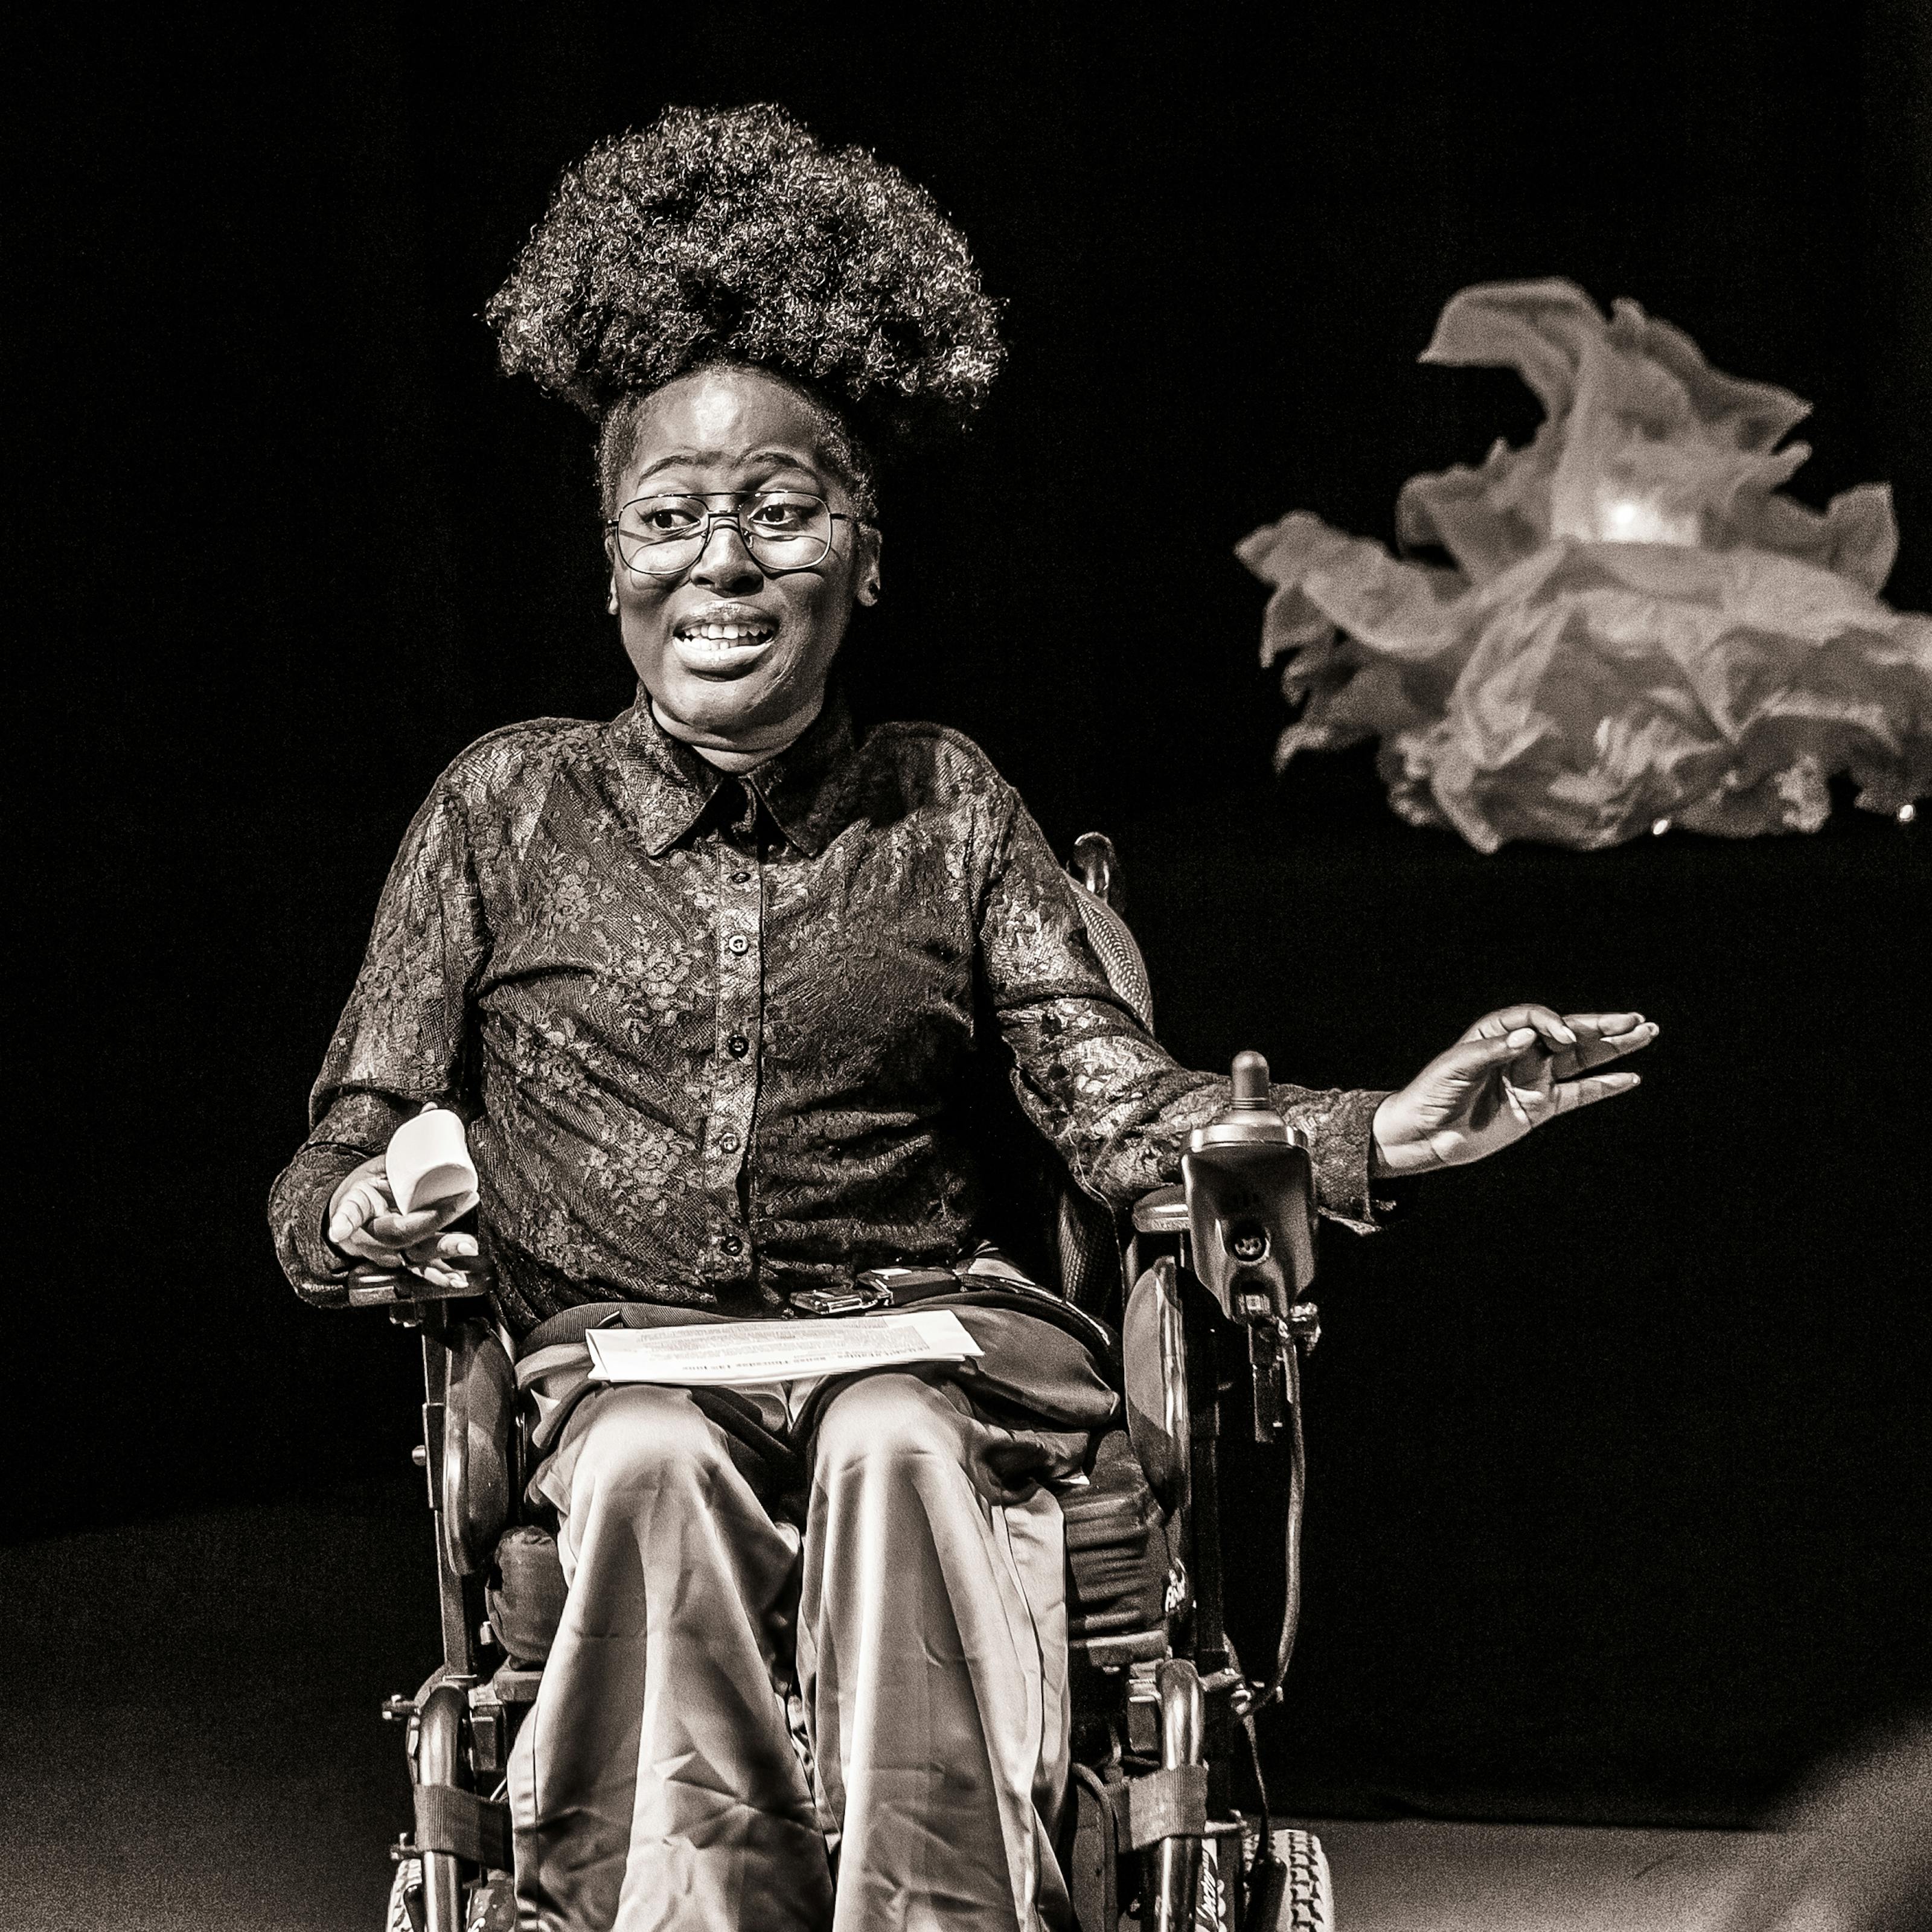 Black and white photograph with a warm tone. The image shows a young woman seated in a wheelchair against a black curtain and lit by a spotlight. She is performing to an audience. She has been captured 'in action'.